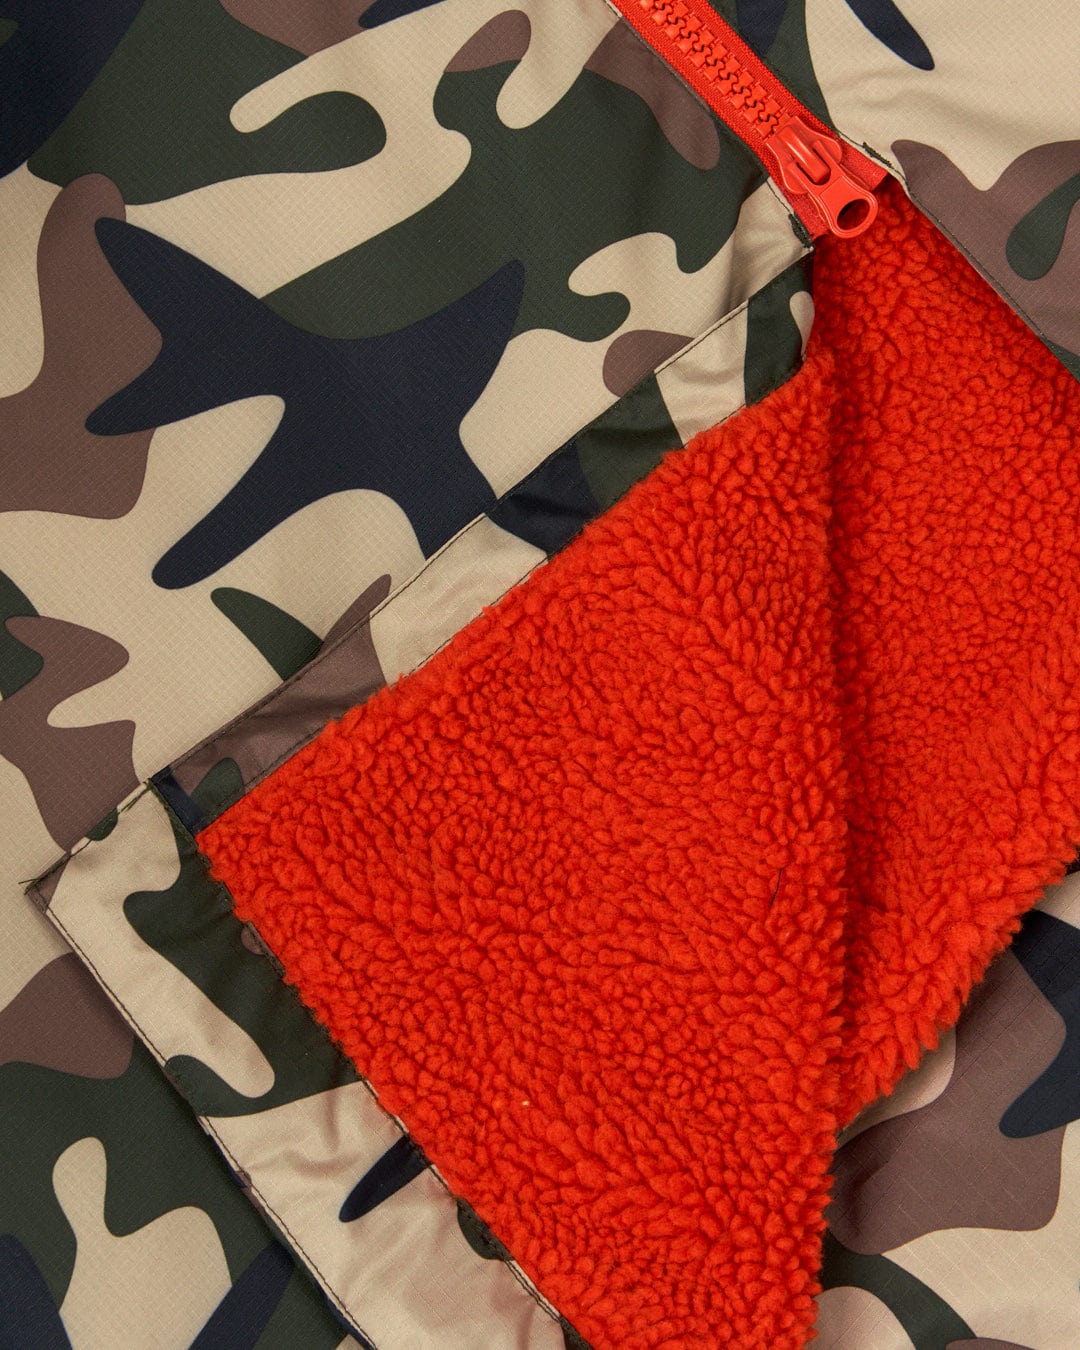 Saltrock's Recycled Four Seasons Changing Robe in Brown Camo with an orange zipper pouch partially open, revealing a soft, orange interior lining of a waterproof changing robe.